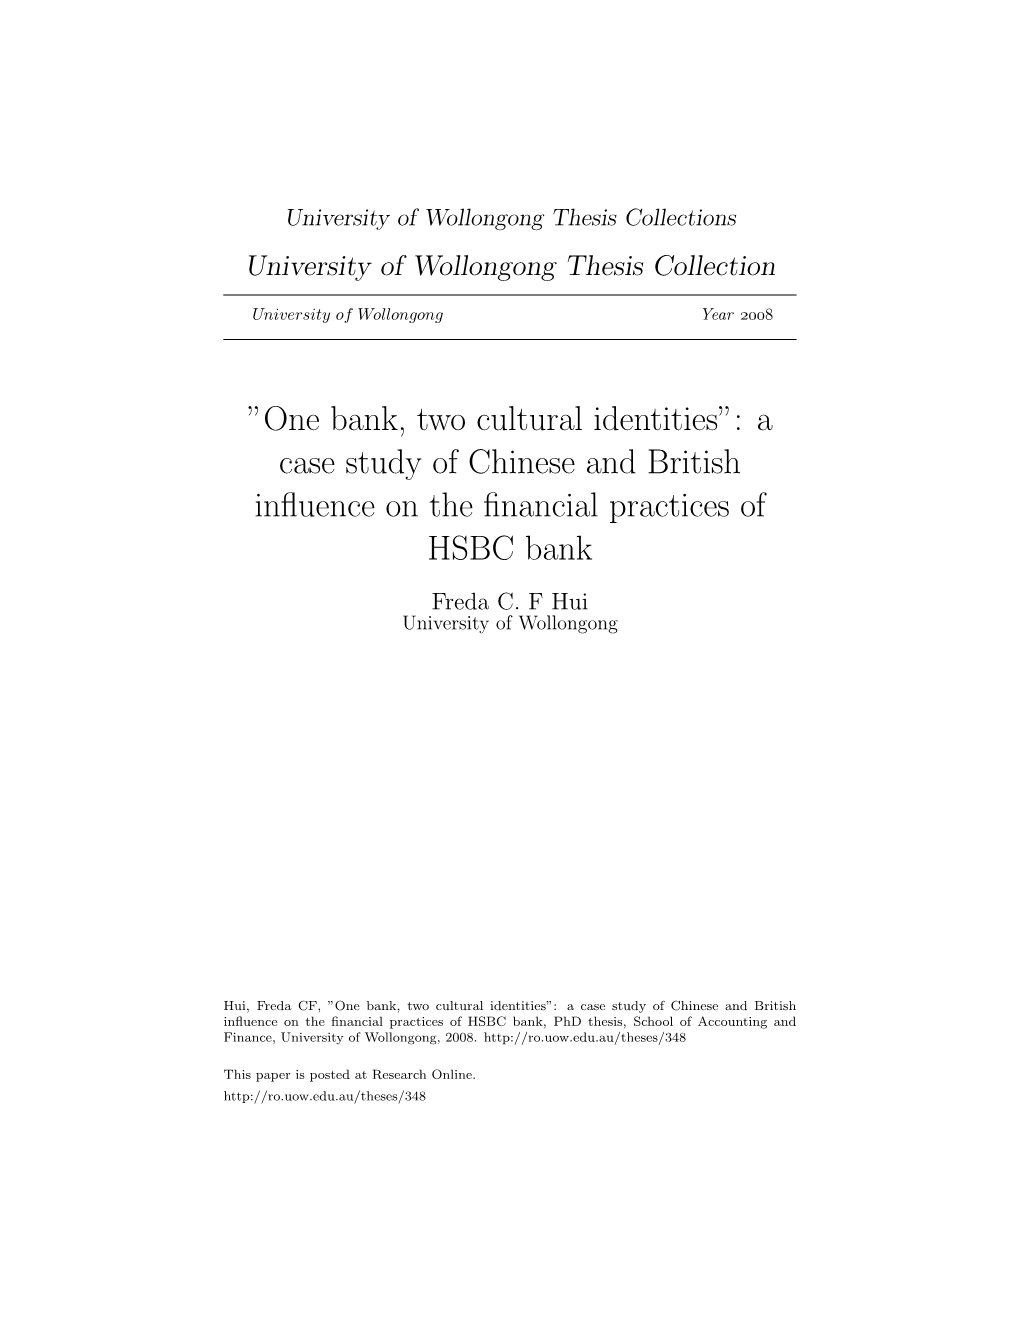 One Bank, Two Cultural Identities”: a Case Study of Chinese and British Inﬂuence on the ﬁnancial Practices of HSBC Bank Freda C